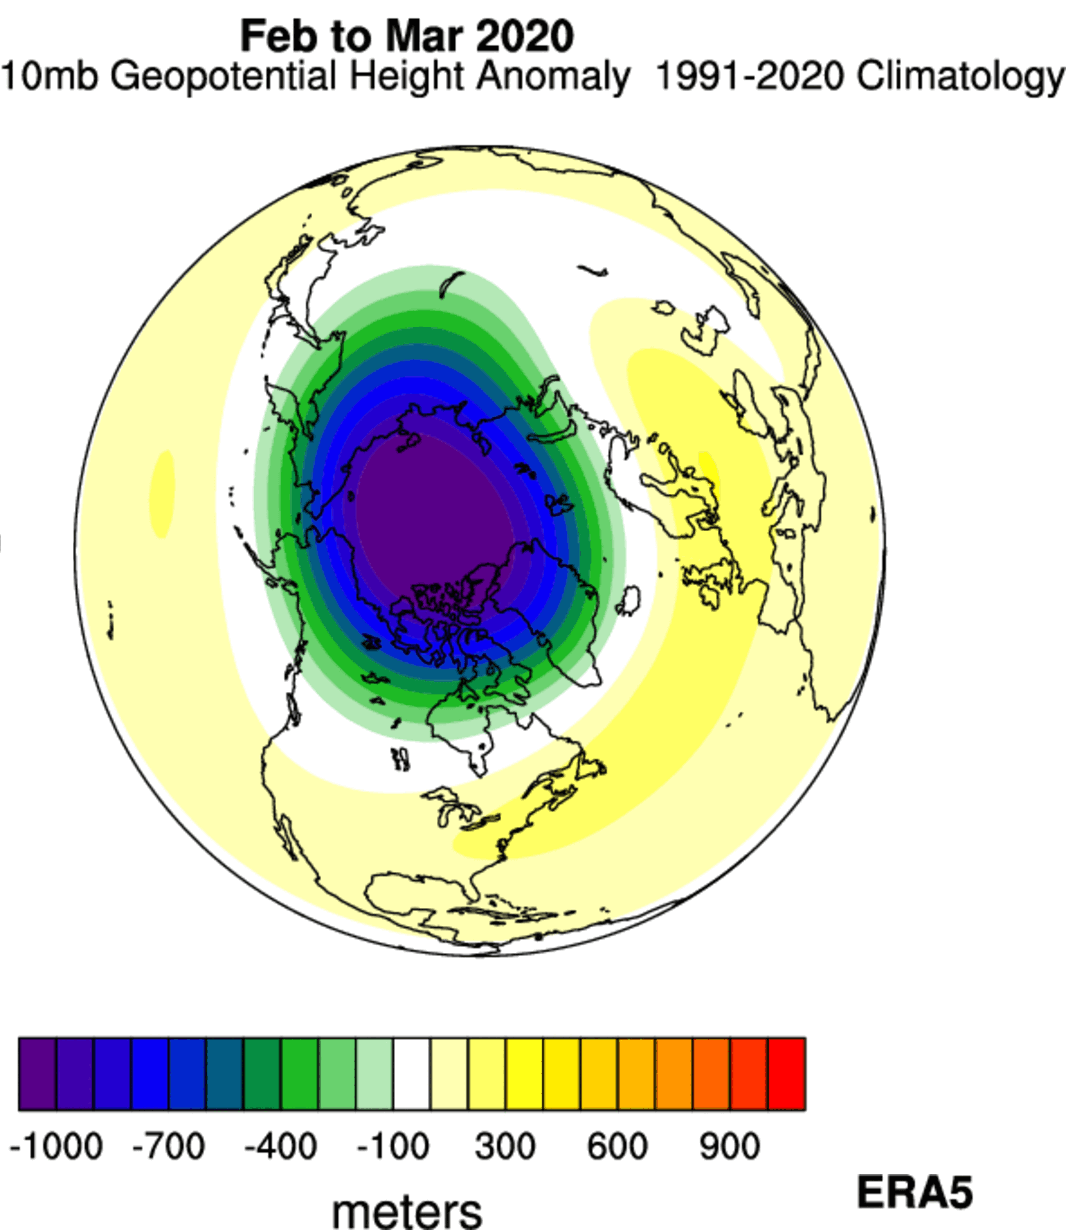 polar-vortex-winter-2022-2023-strong-cold-event-stratosphere-anomaly